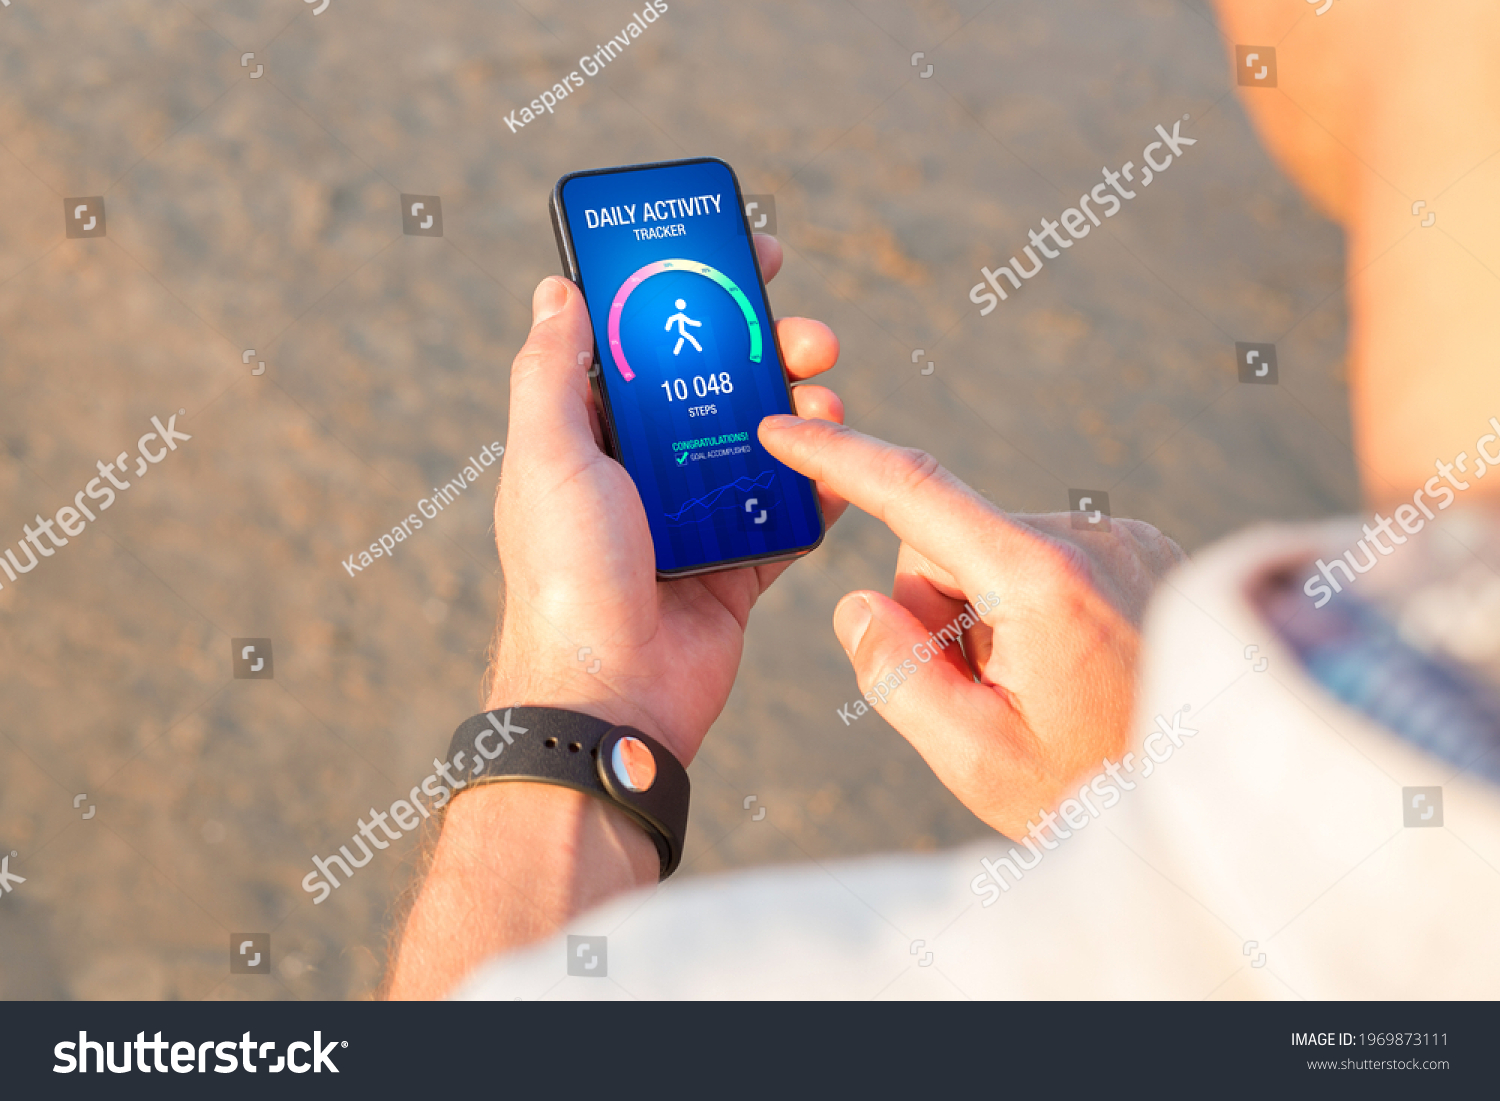 Man using daily activity tracking app on mobile phone showing 10 000 steps daily goal achievement #1969873111